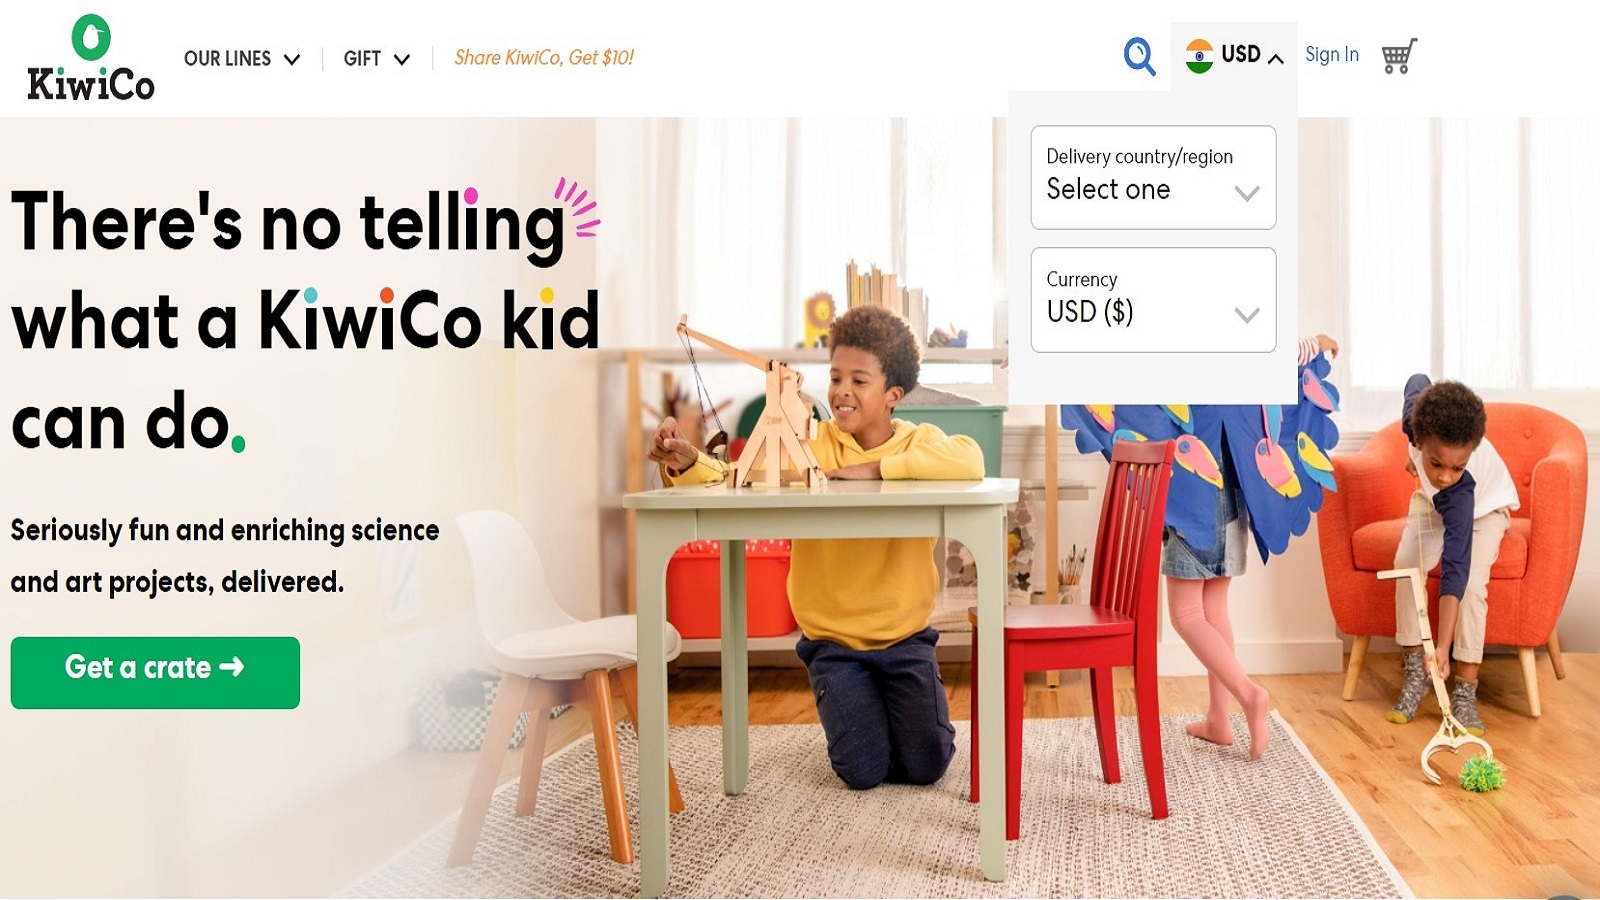 KiwiCo Review: Should You Buy Such Hands-On Projects for Your Child?